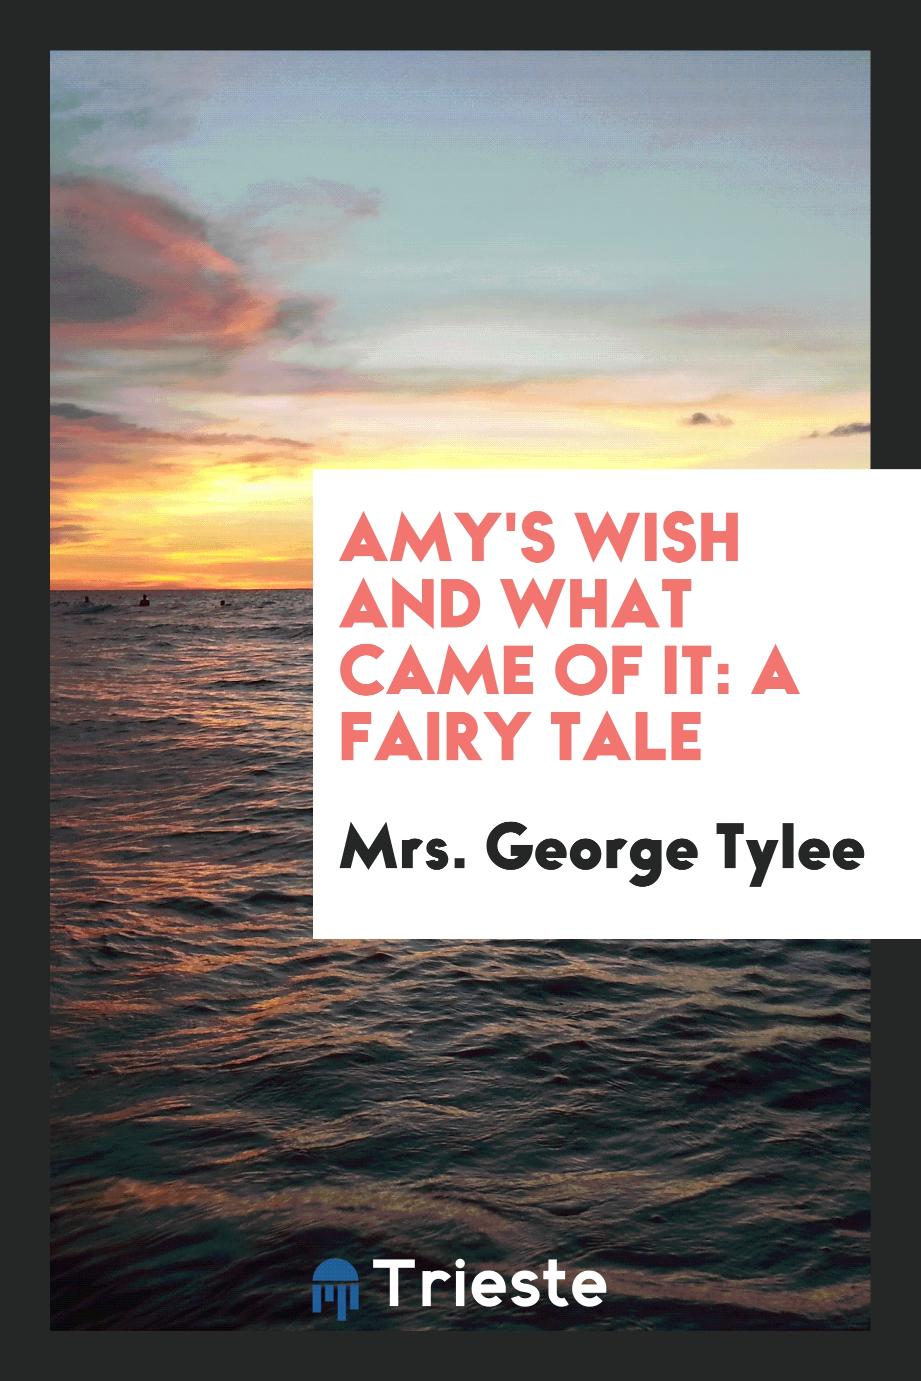 Amy's Wish and What Came of It: A Fairy Tale